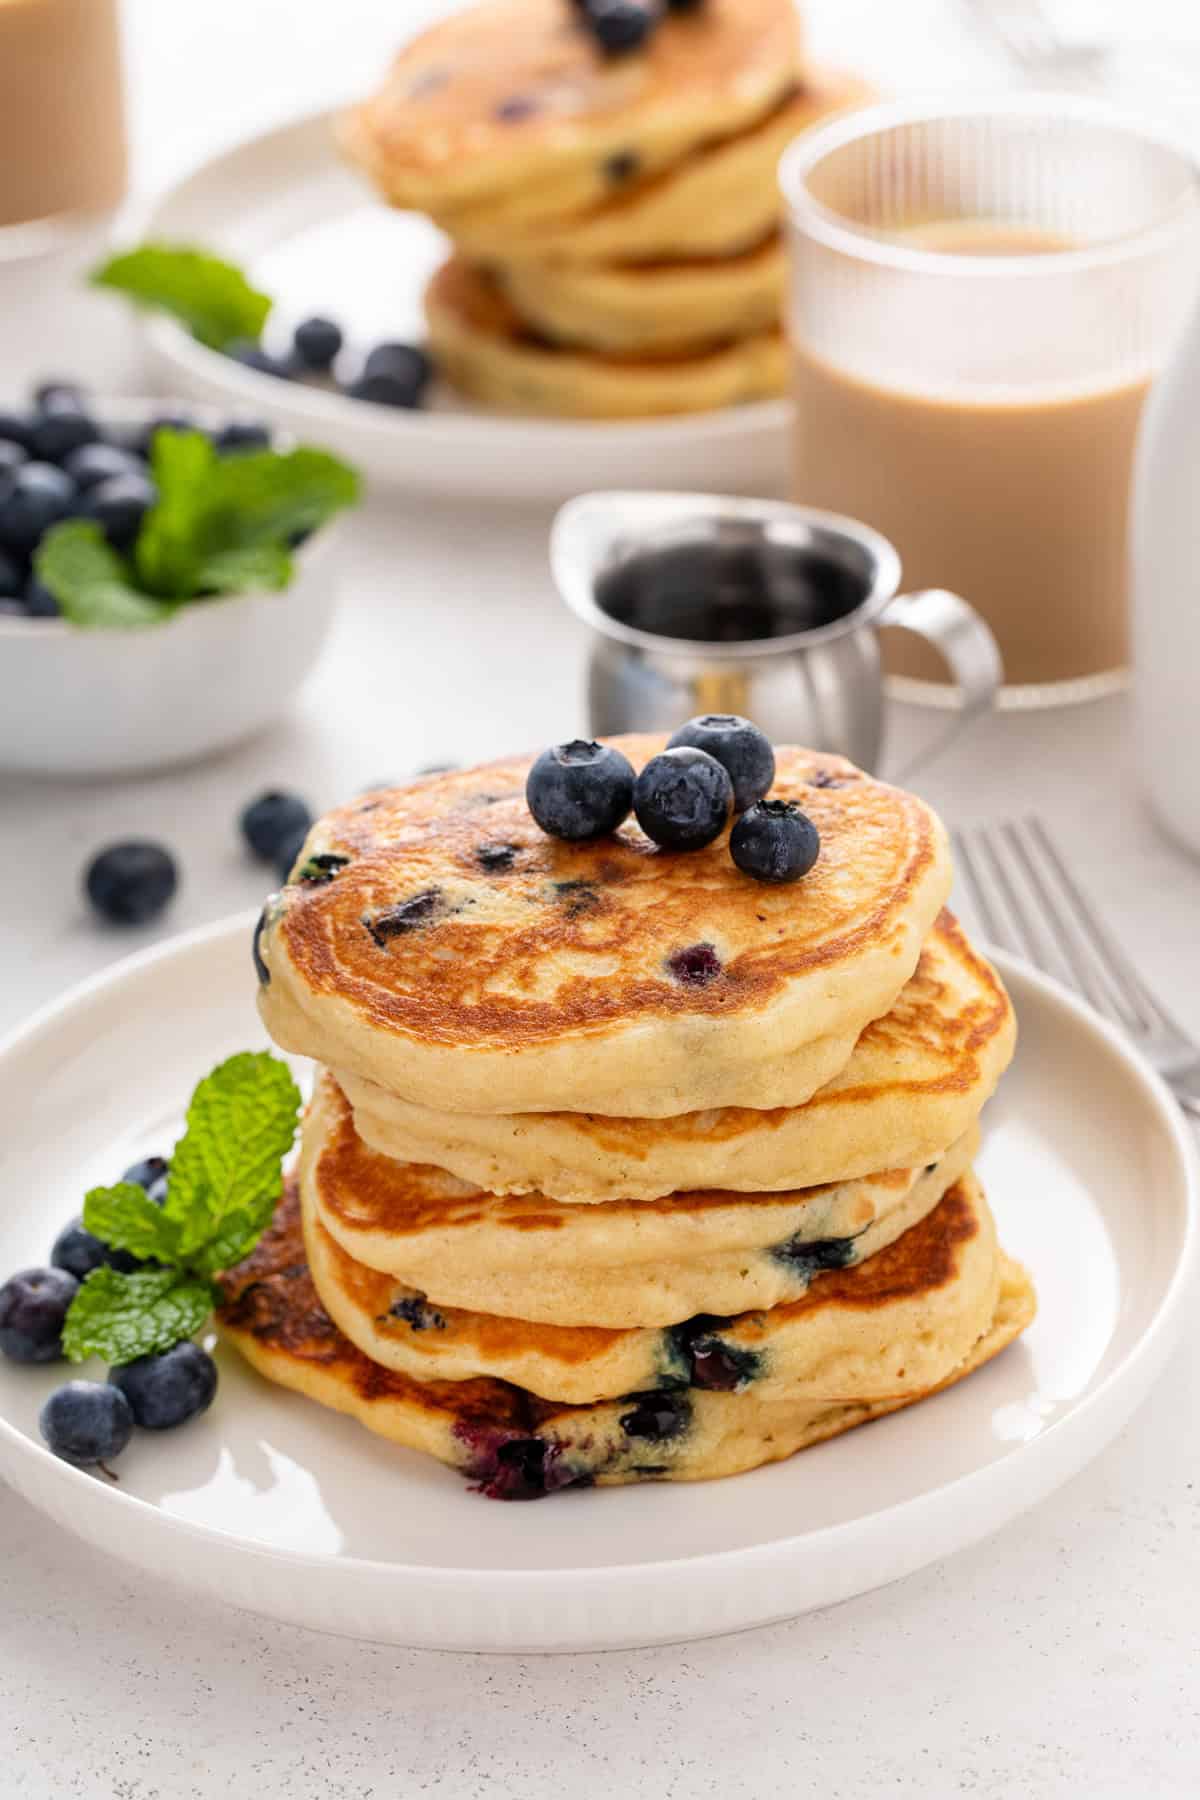 Blueberry pancakes stacked on a white plate and topped with fresh blueberries.